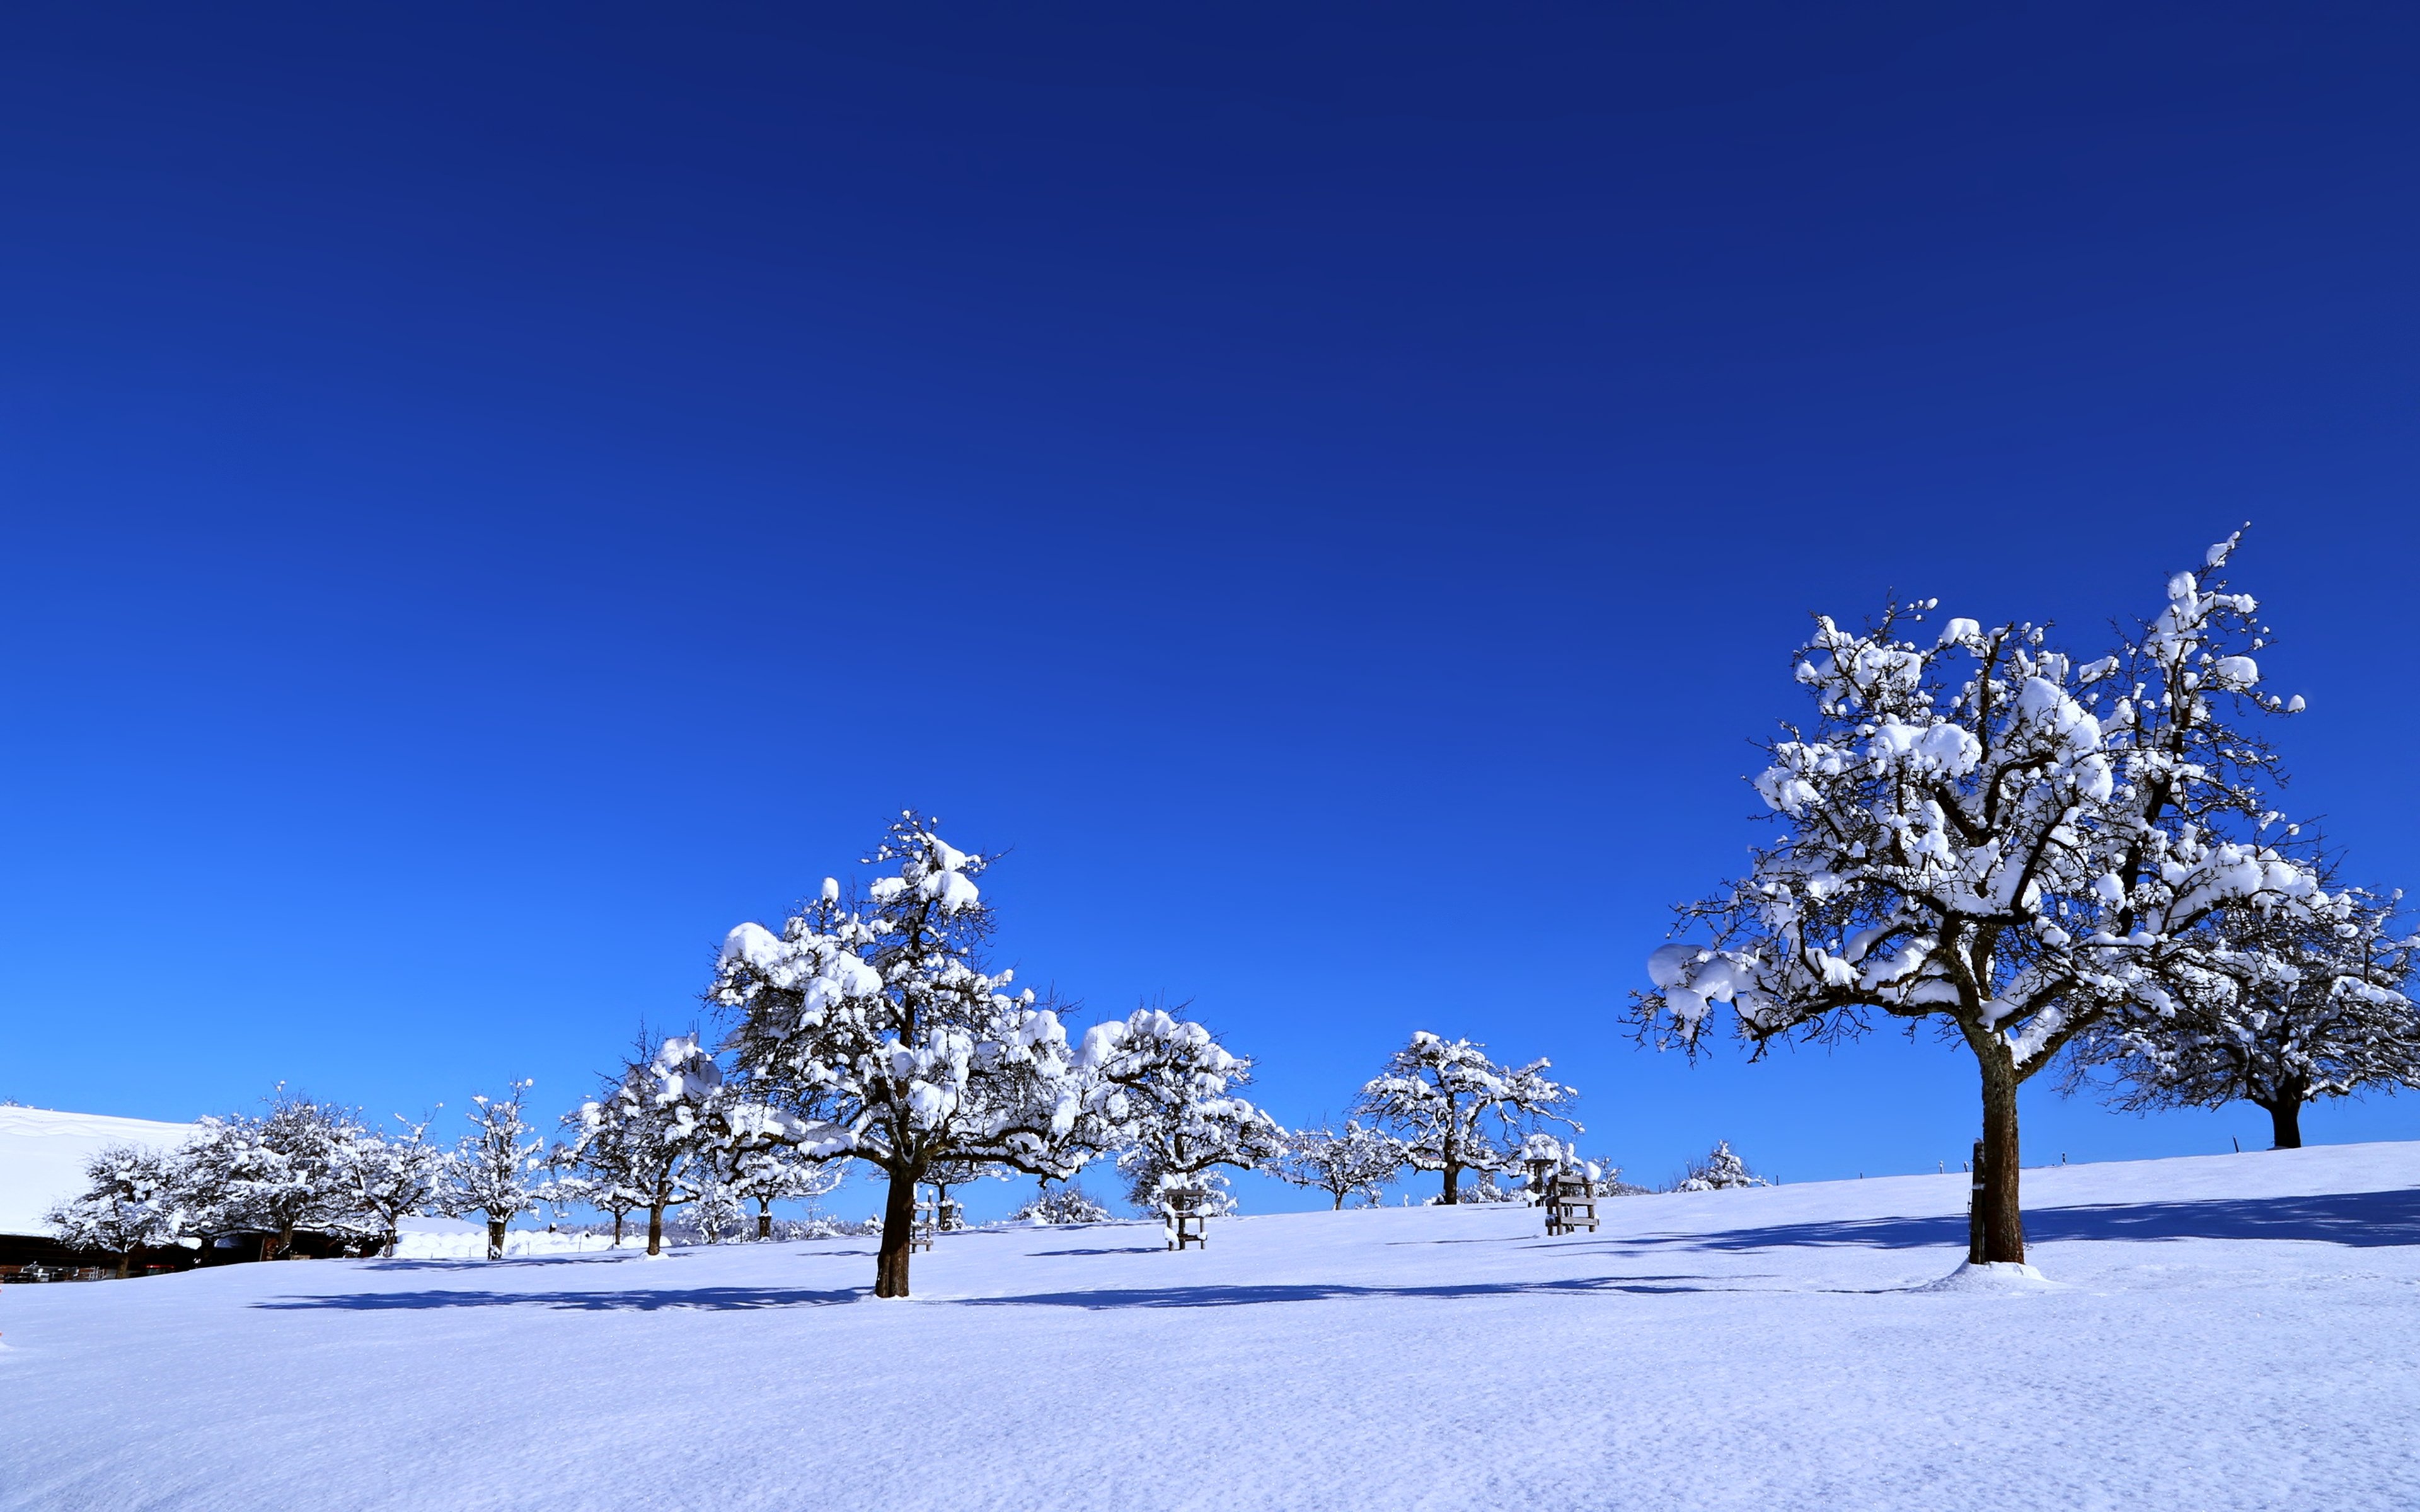 landscapes, Nature, Earth, Snow, Sky, Sunny, Blue, Trees, Cold, Winter, Countryside Wallpaper